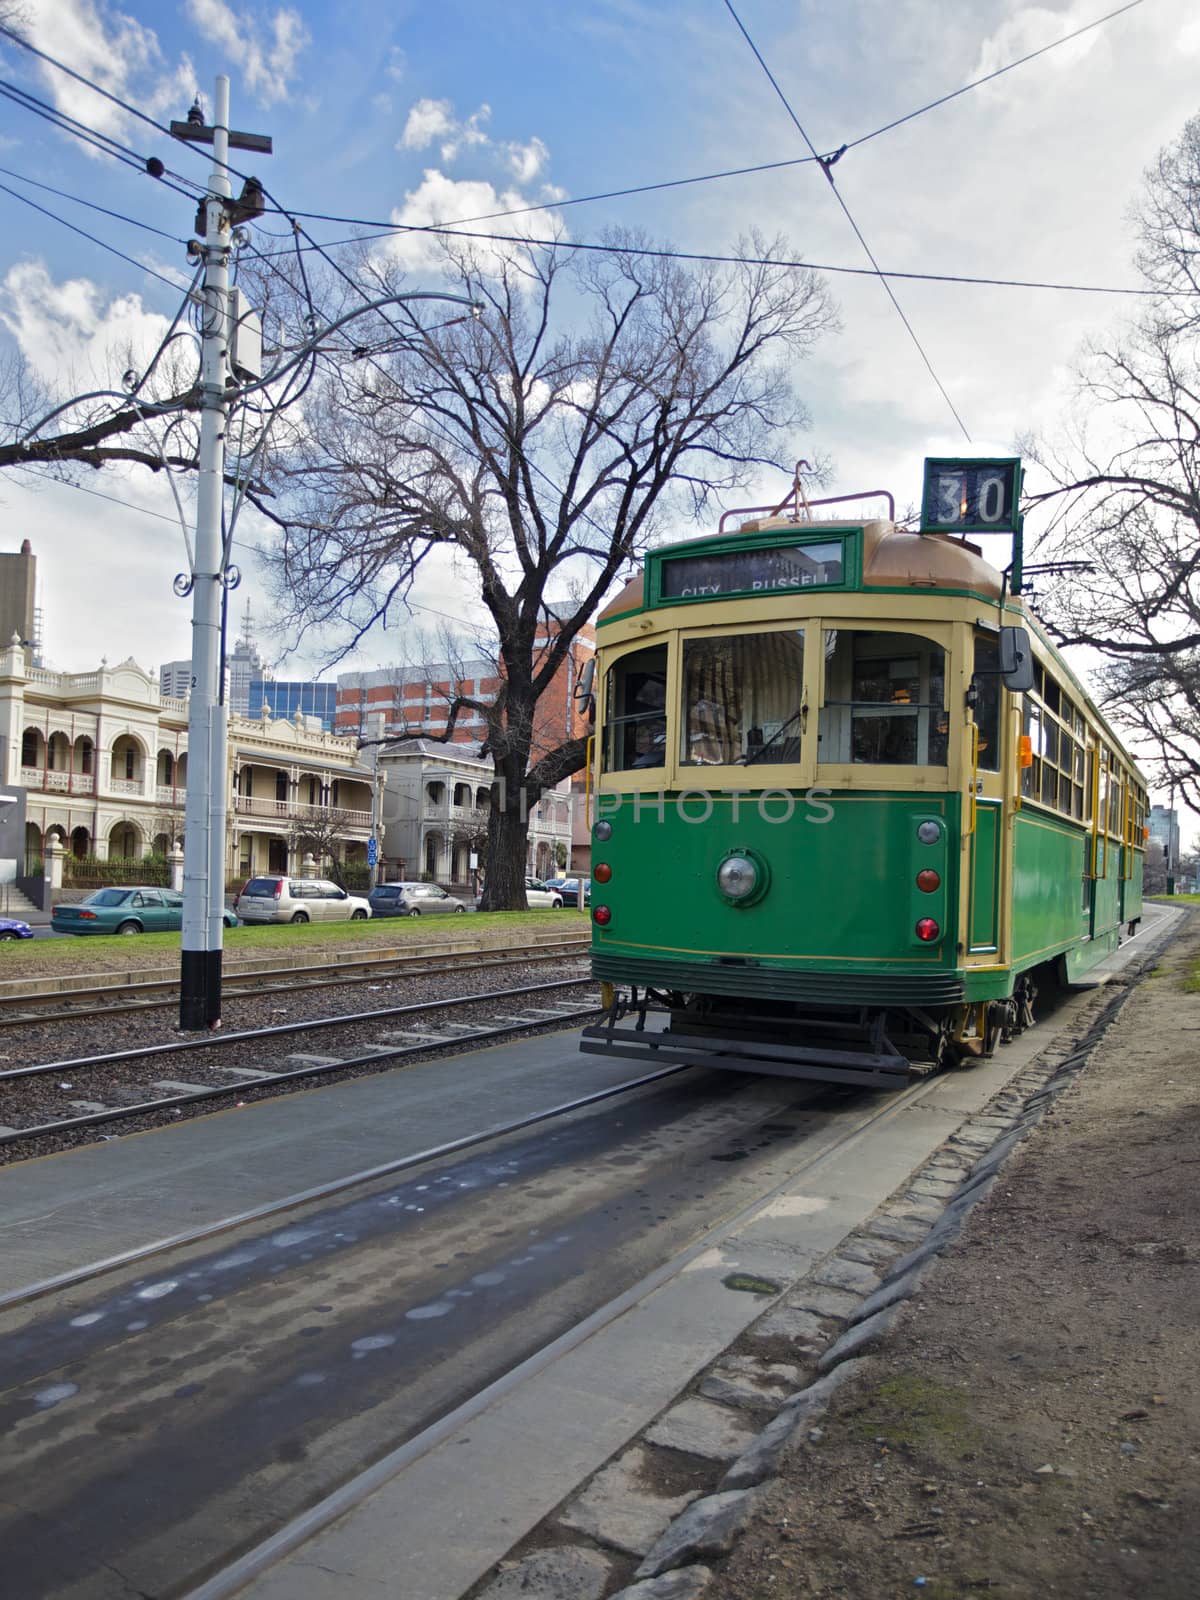 Melbourne Trams in the city centre, Transportation